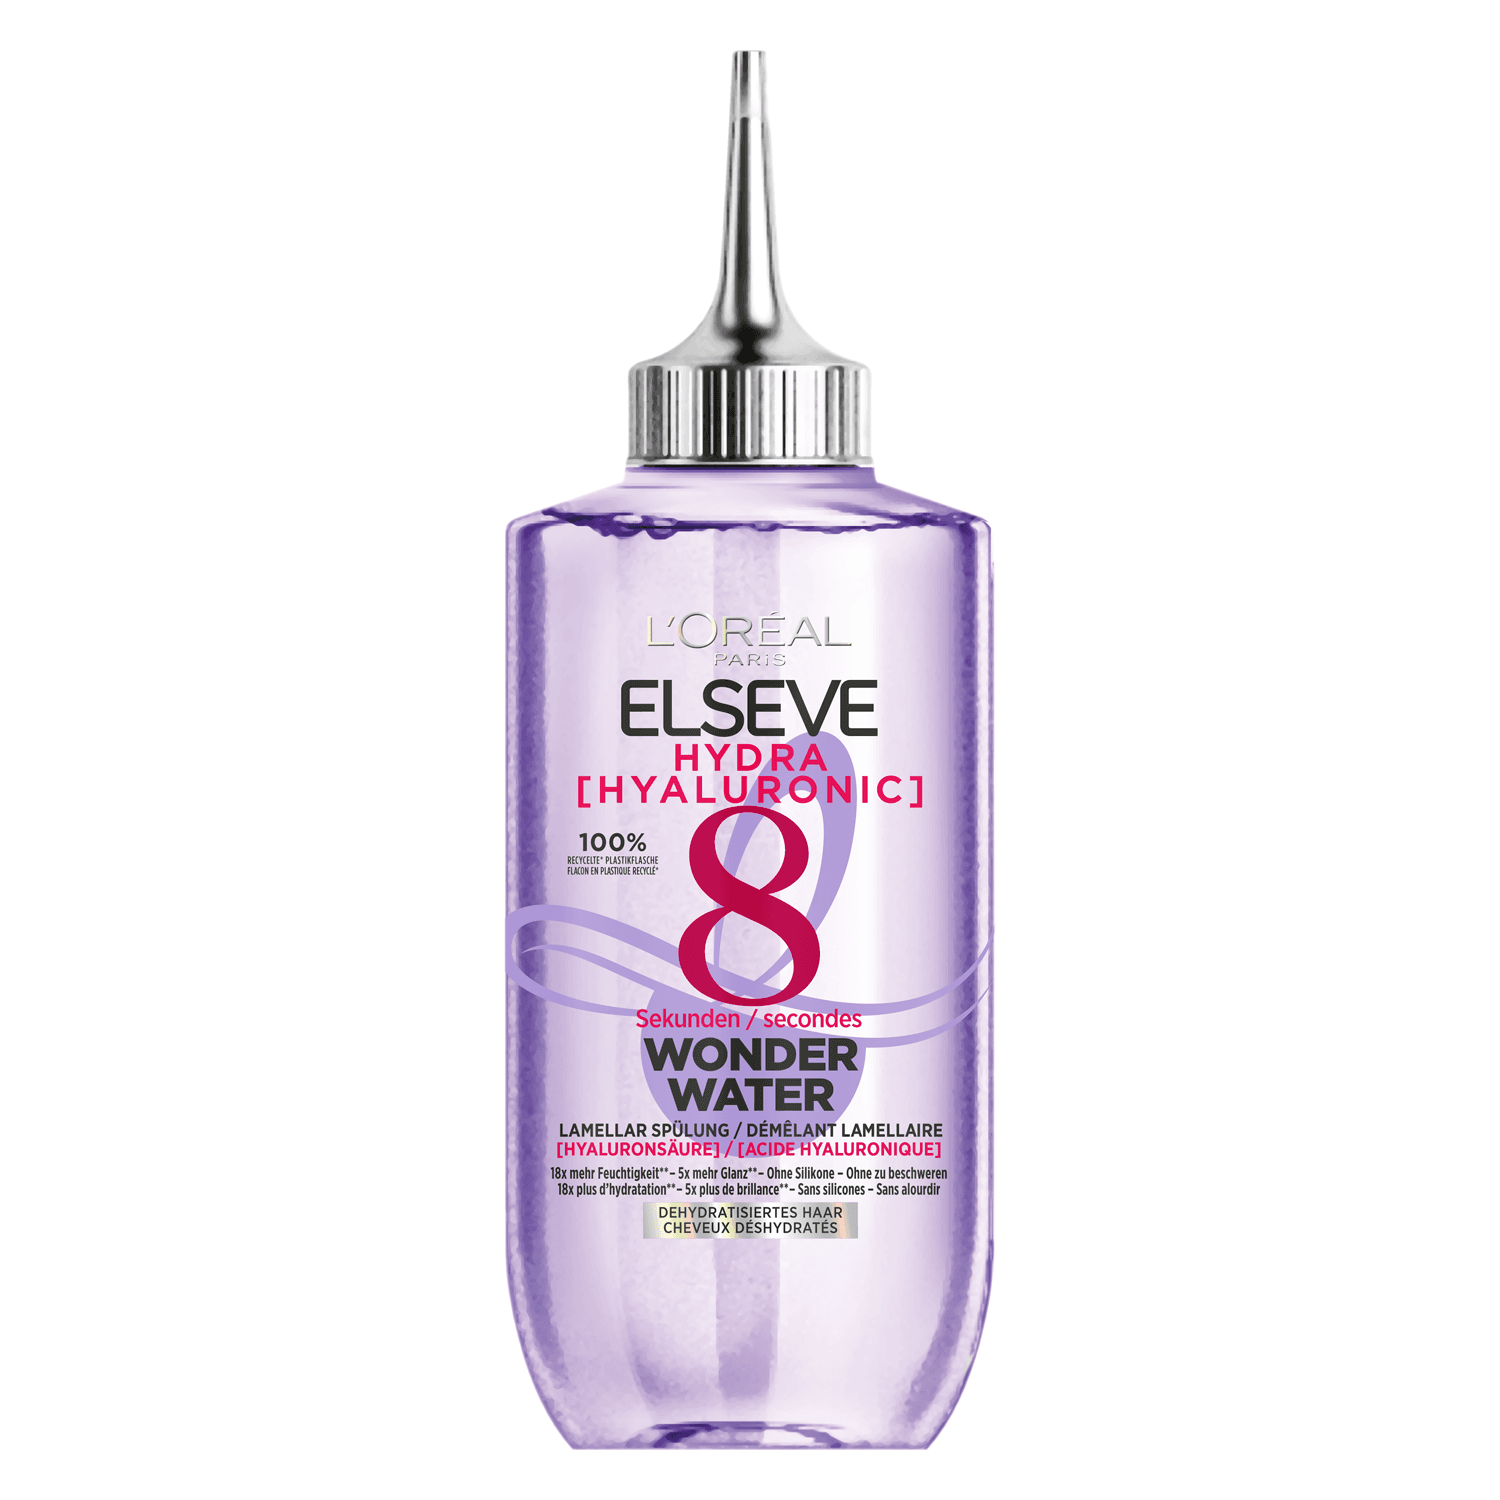 LOréal Elseve Haircare - Hydra Hyaluronic 8 Seconds Wonder Water